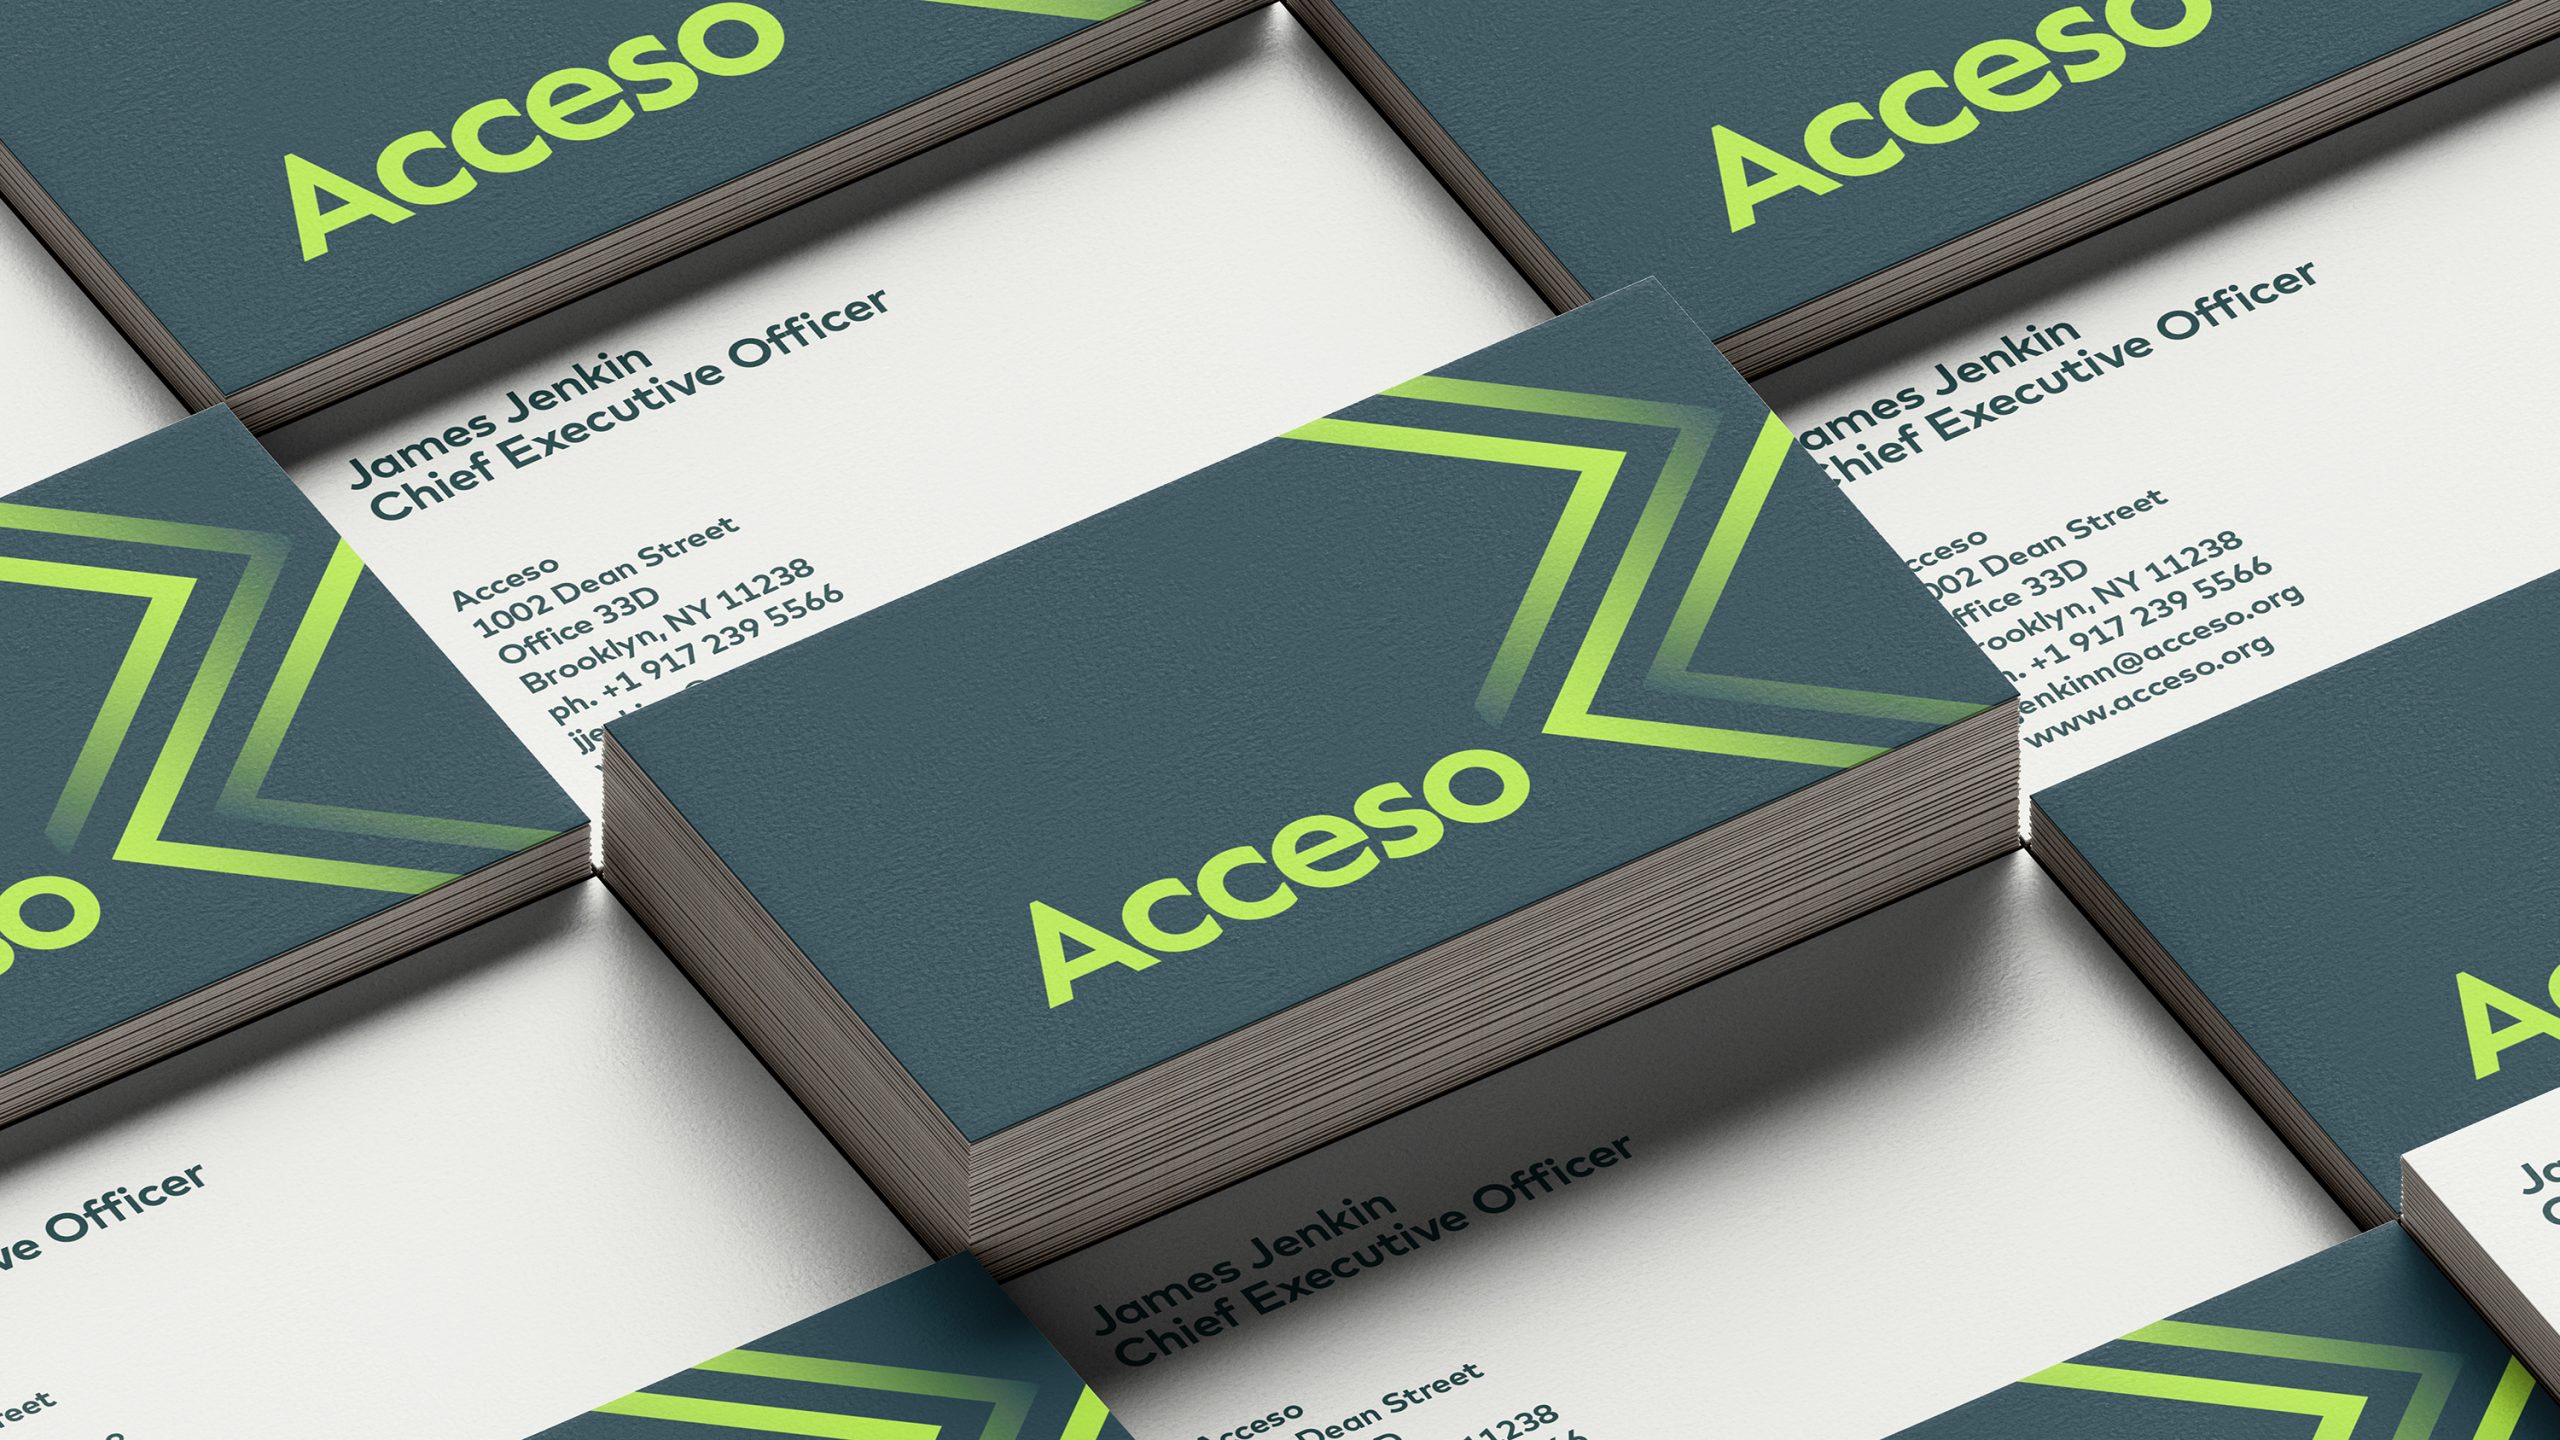 3.-Acceso-Case-Study-Business-Cards-v02